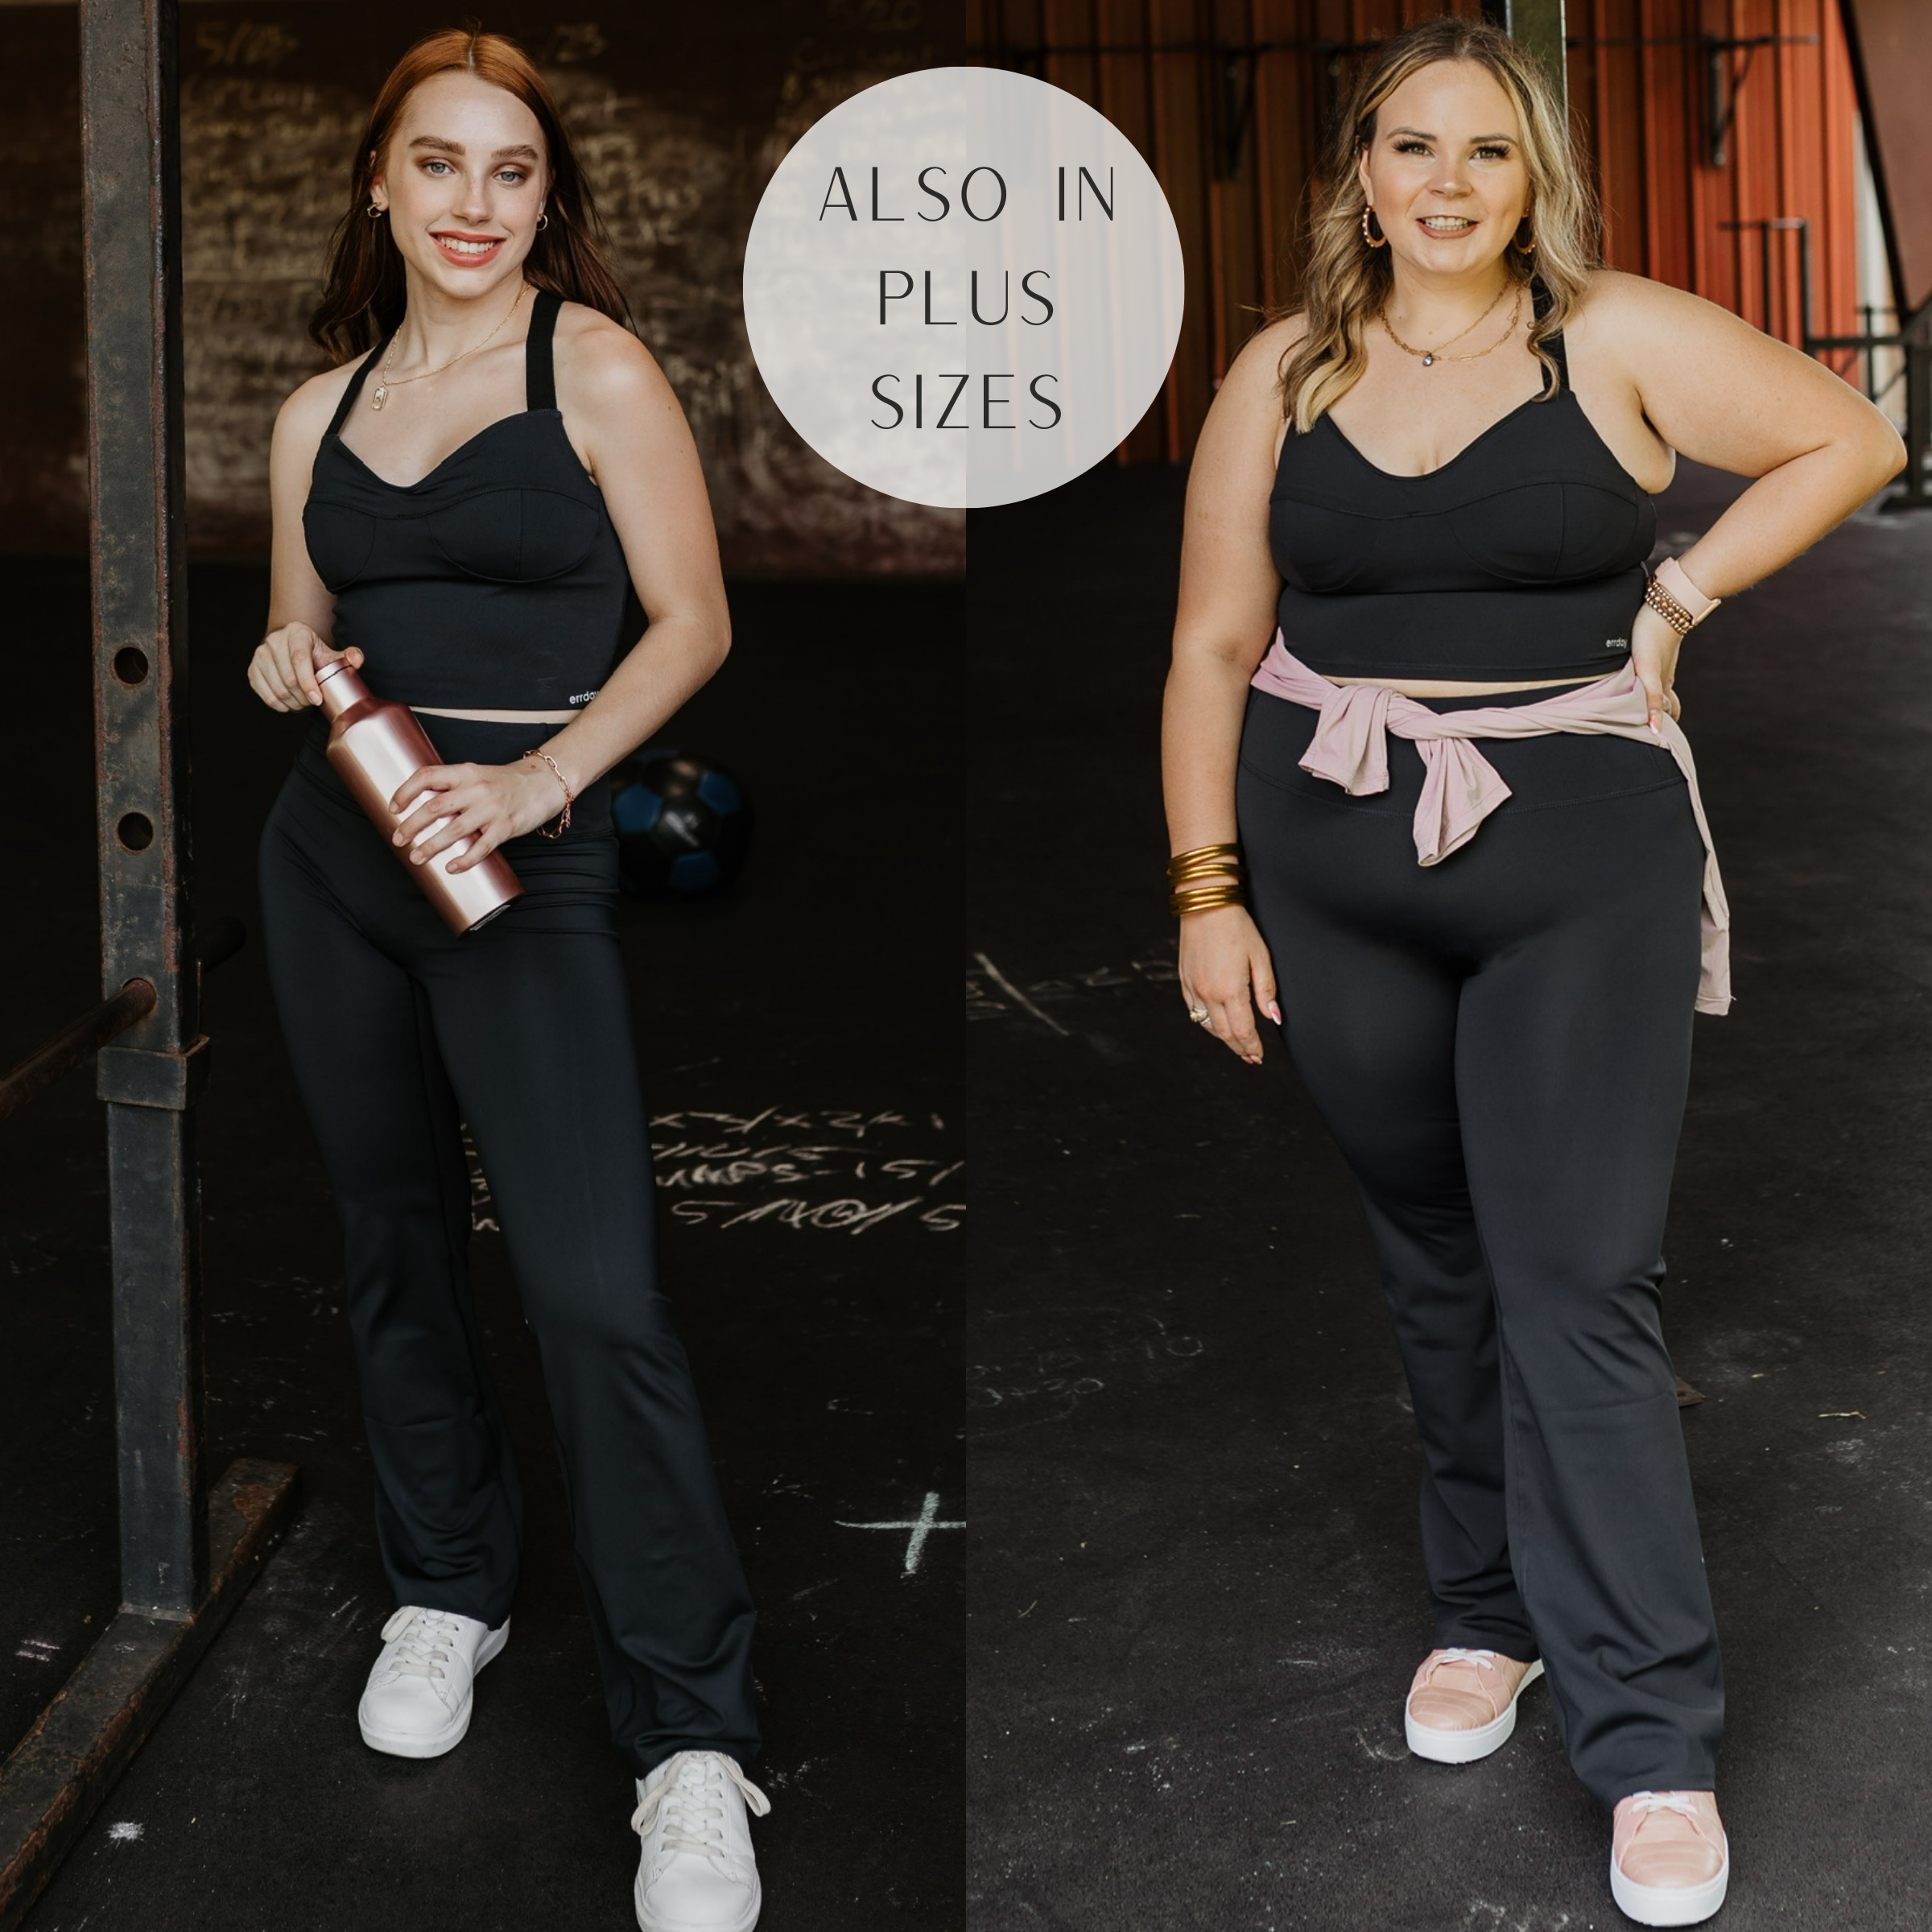 Models are wearing a criss-cross back sports bra. Both models have it paired with matching flare yoga pants. Size small model has it paired with white sneakers and gold jewelry. Size large model has it paired with blush pink sneakers and gold jewelry.